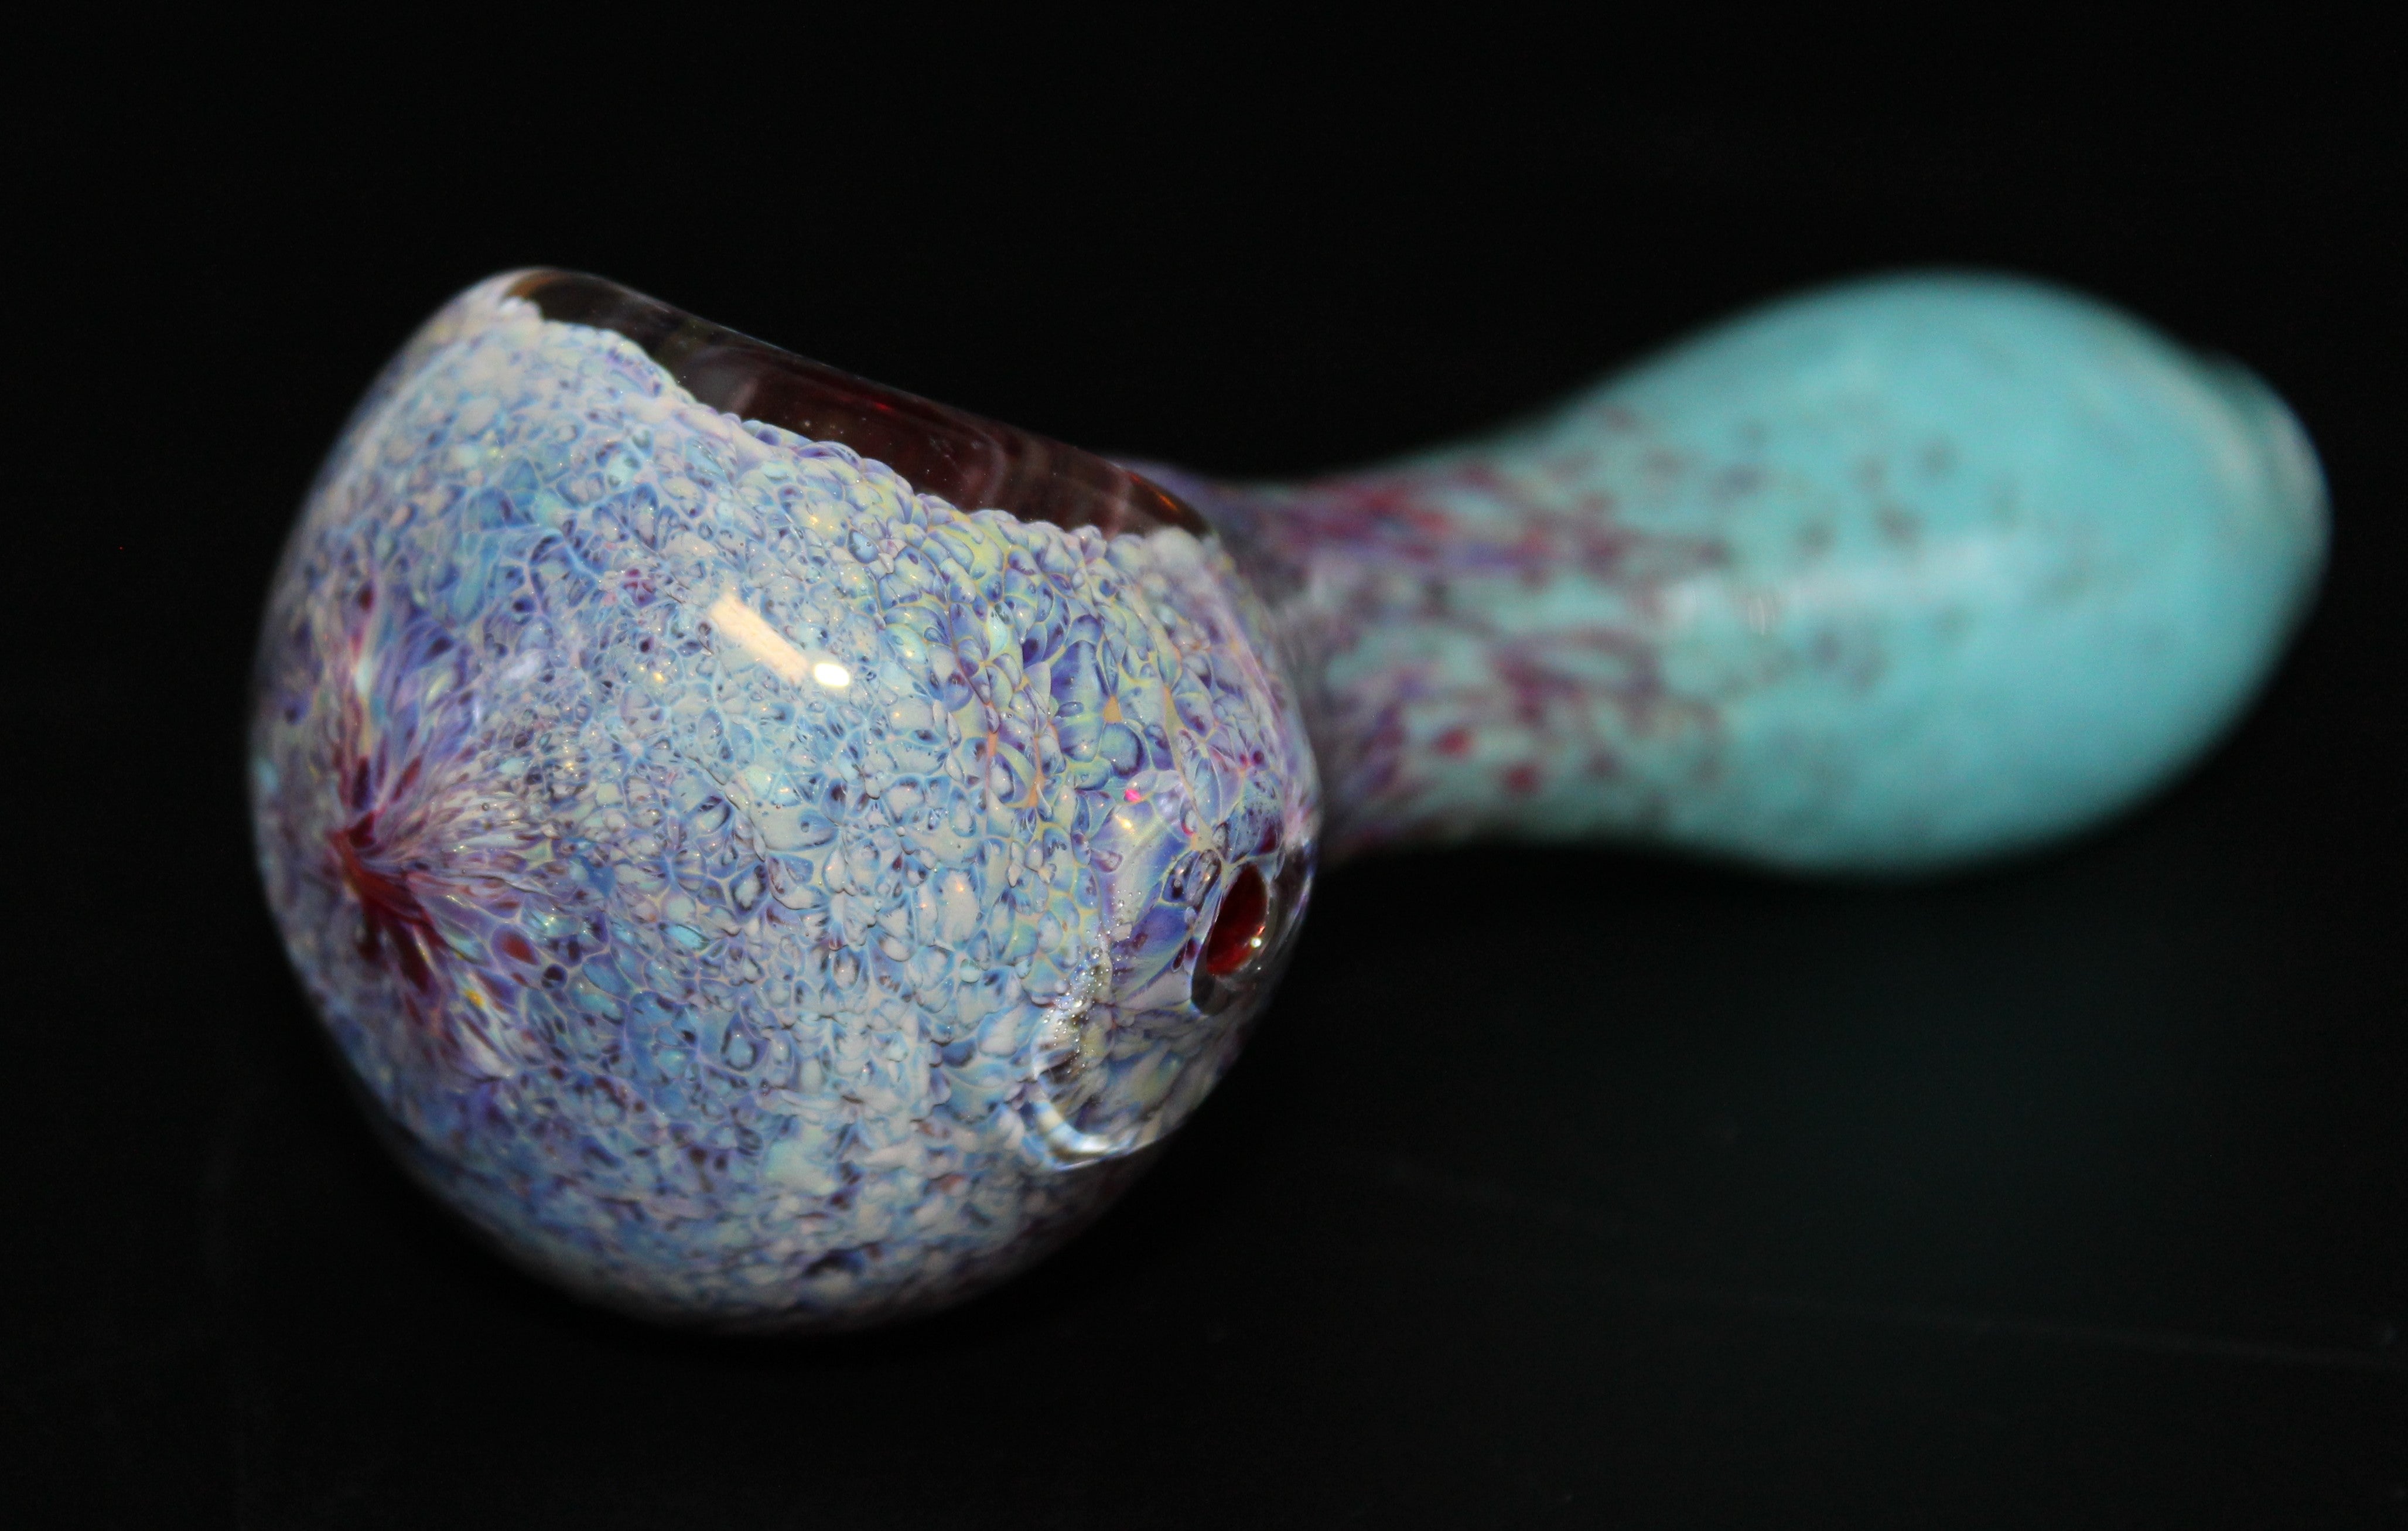 FRIT STORM Glass Pipe  STORMY GLASS Pipes